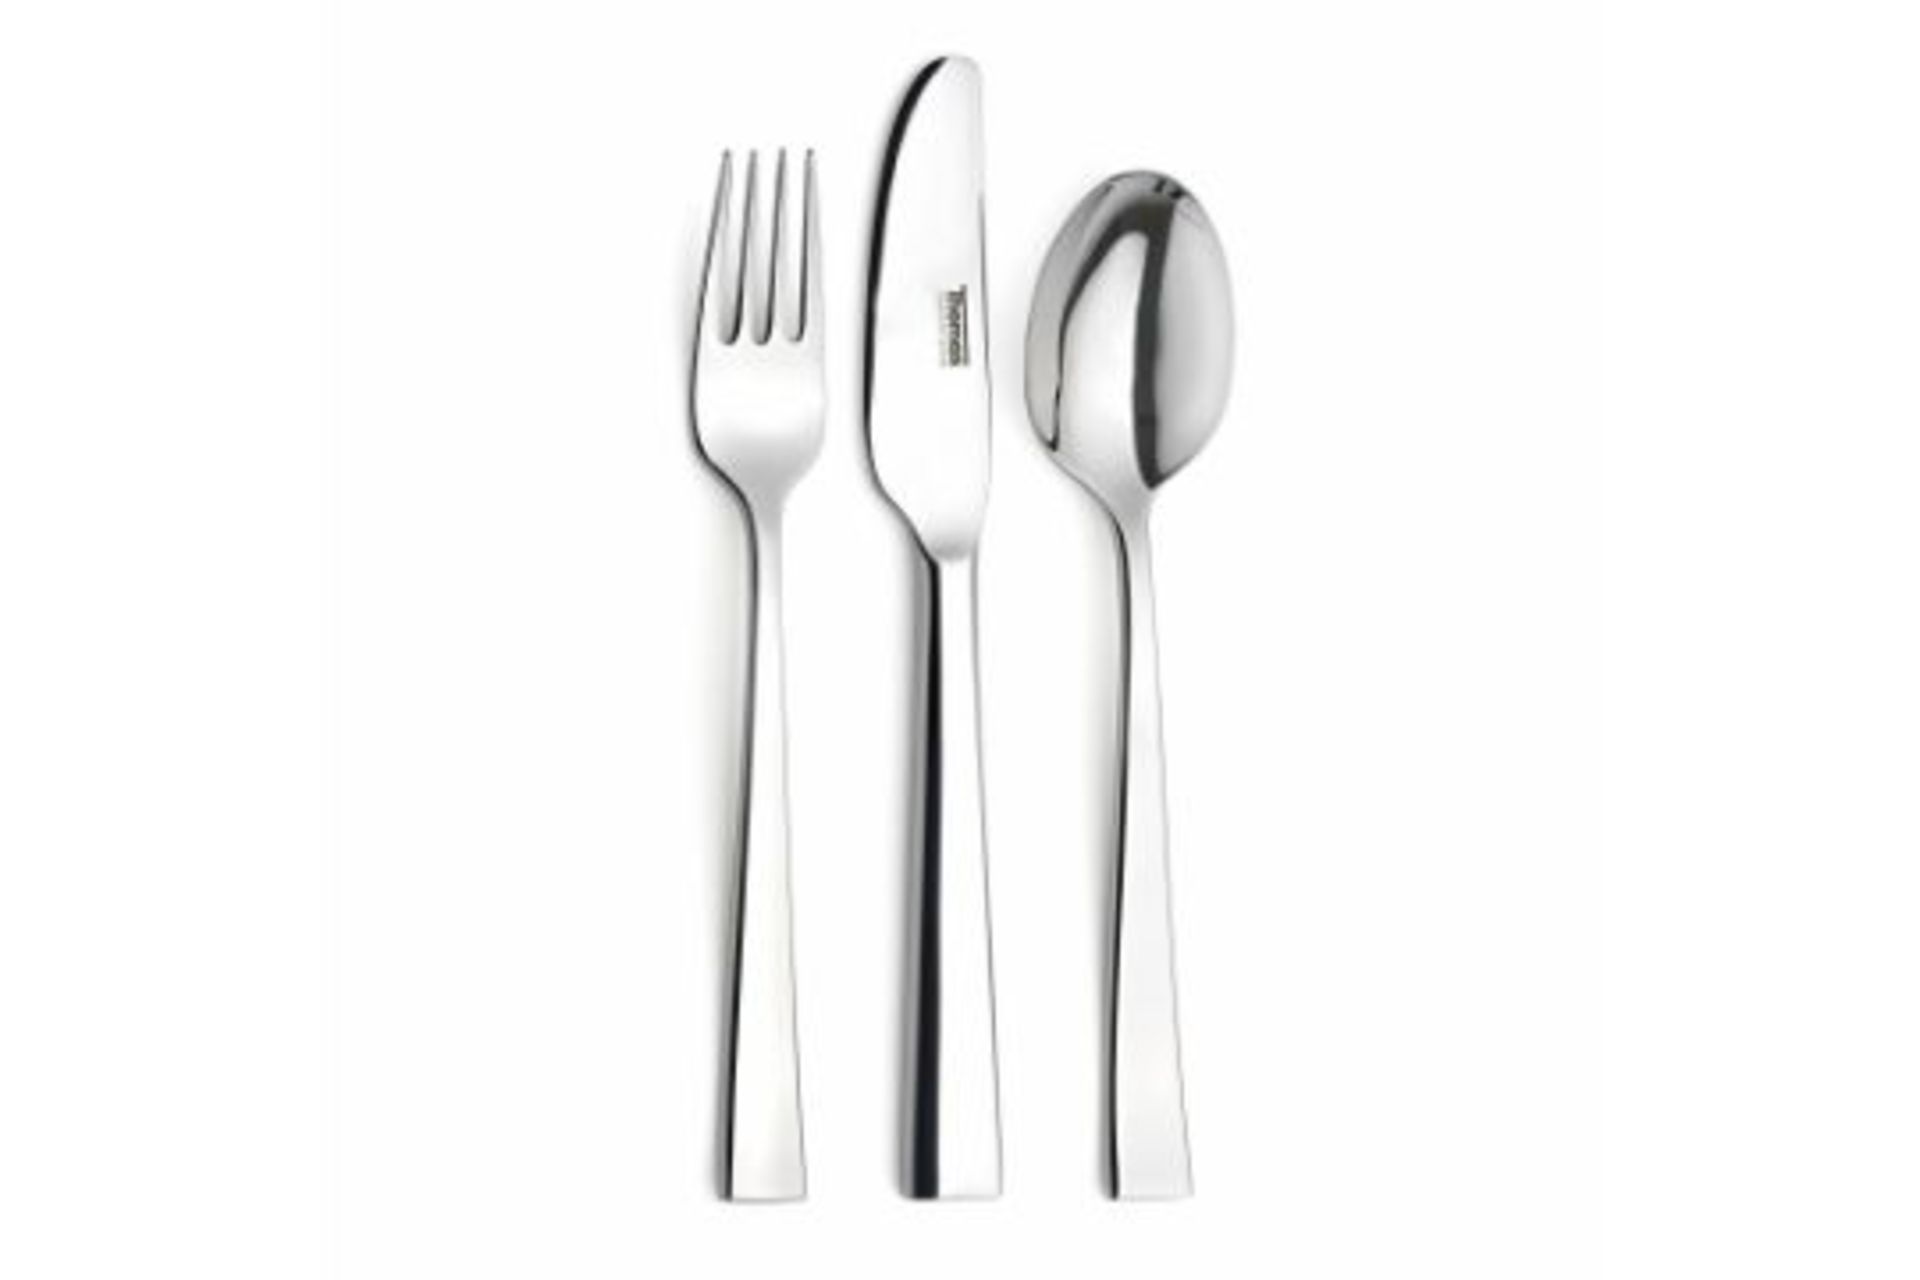 48 x New Boxed Sets of 3 Thomas Children’s Cutlery Set Stainless Steel Easy Grip Handle. RRP £24. - Image 8 of 8